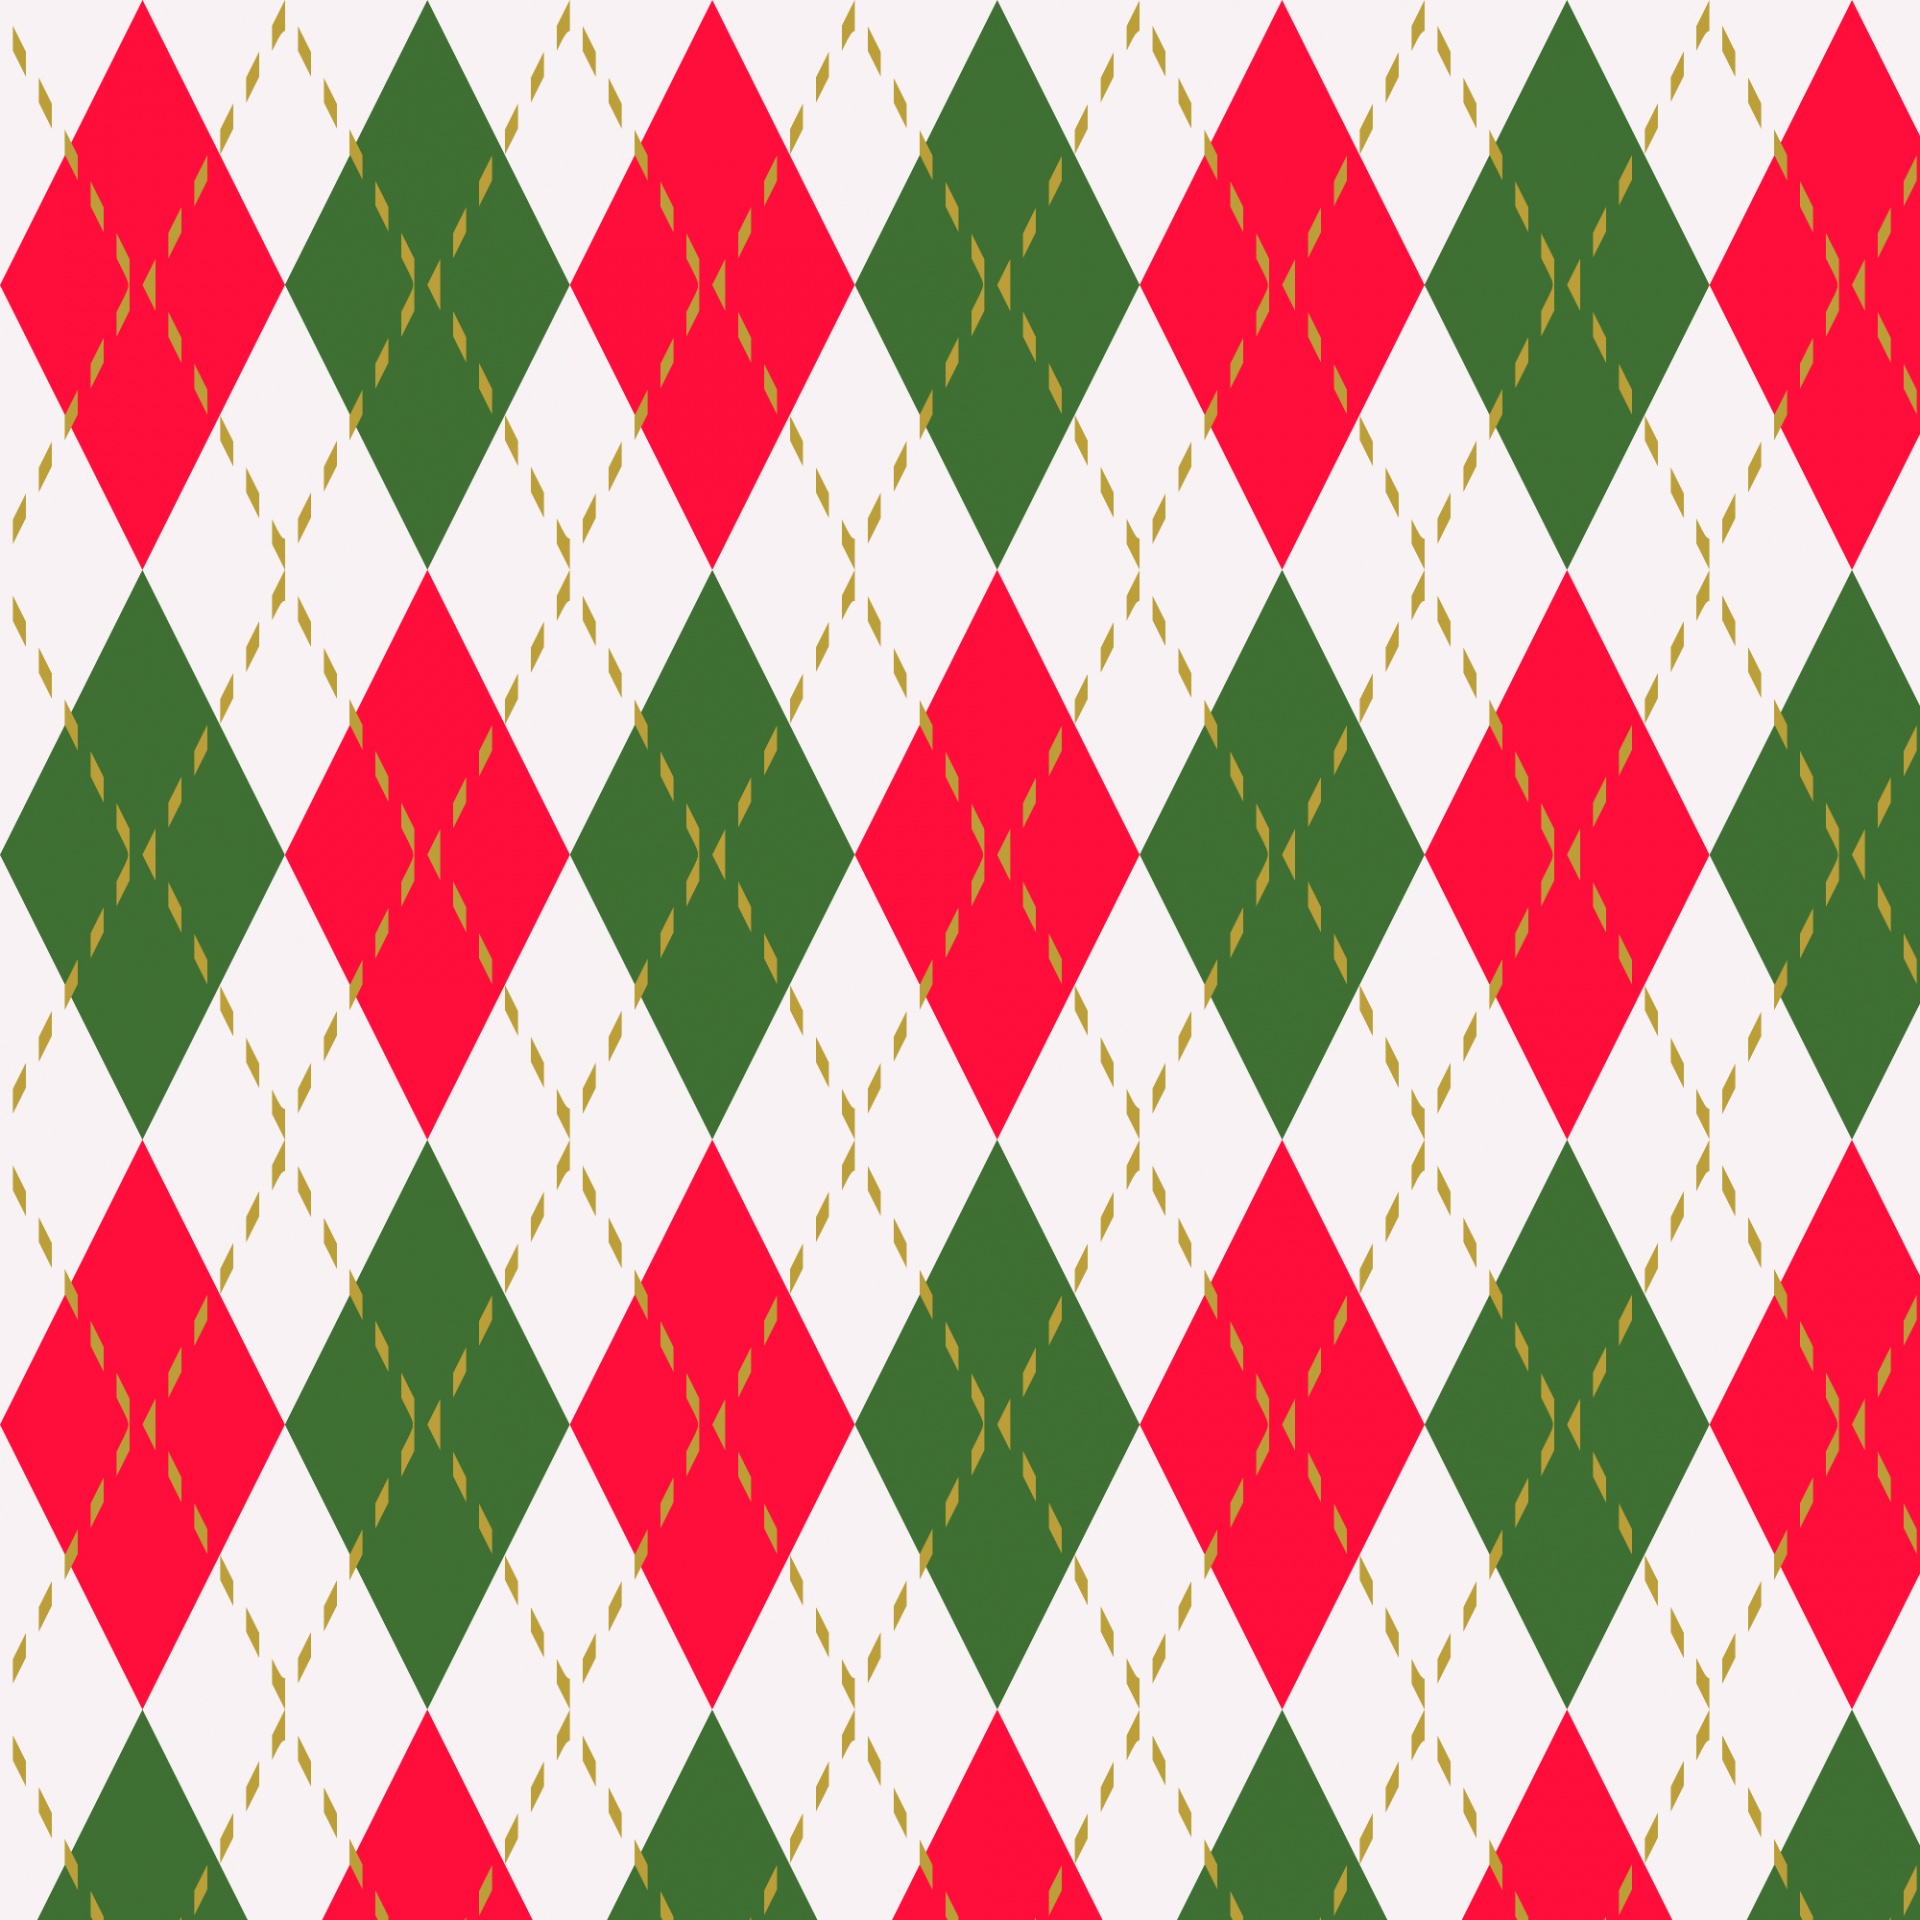 red and green Argyle fabric for paper, scrapbook, cards, invitations